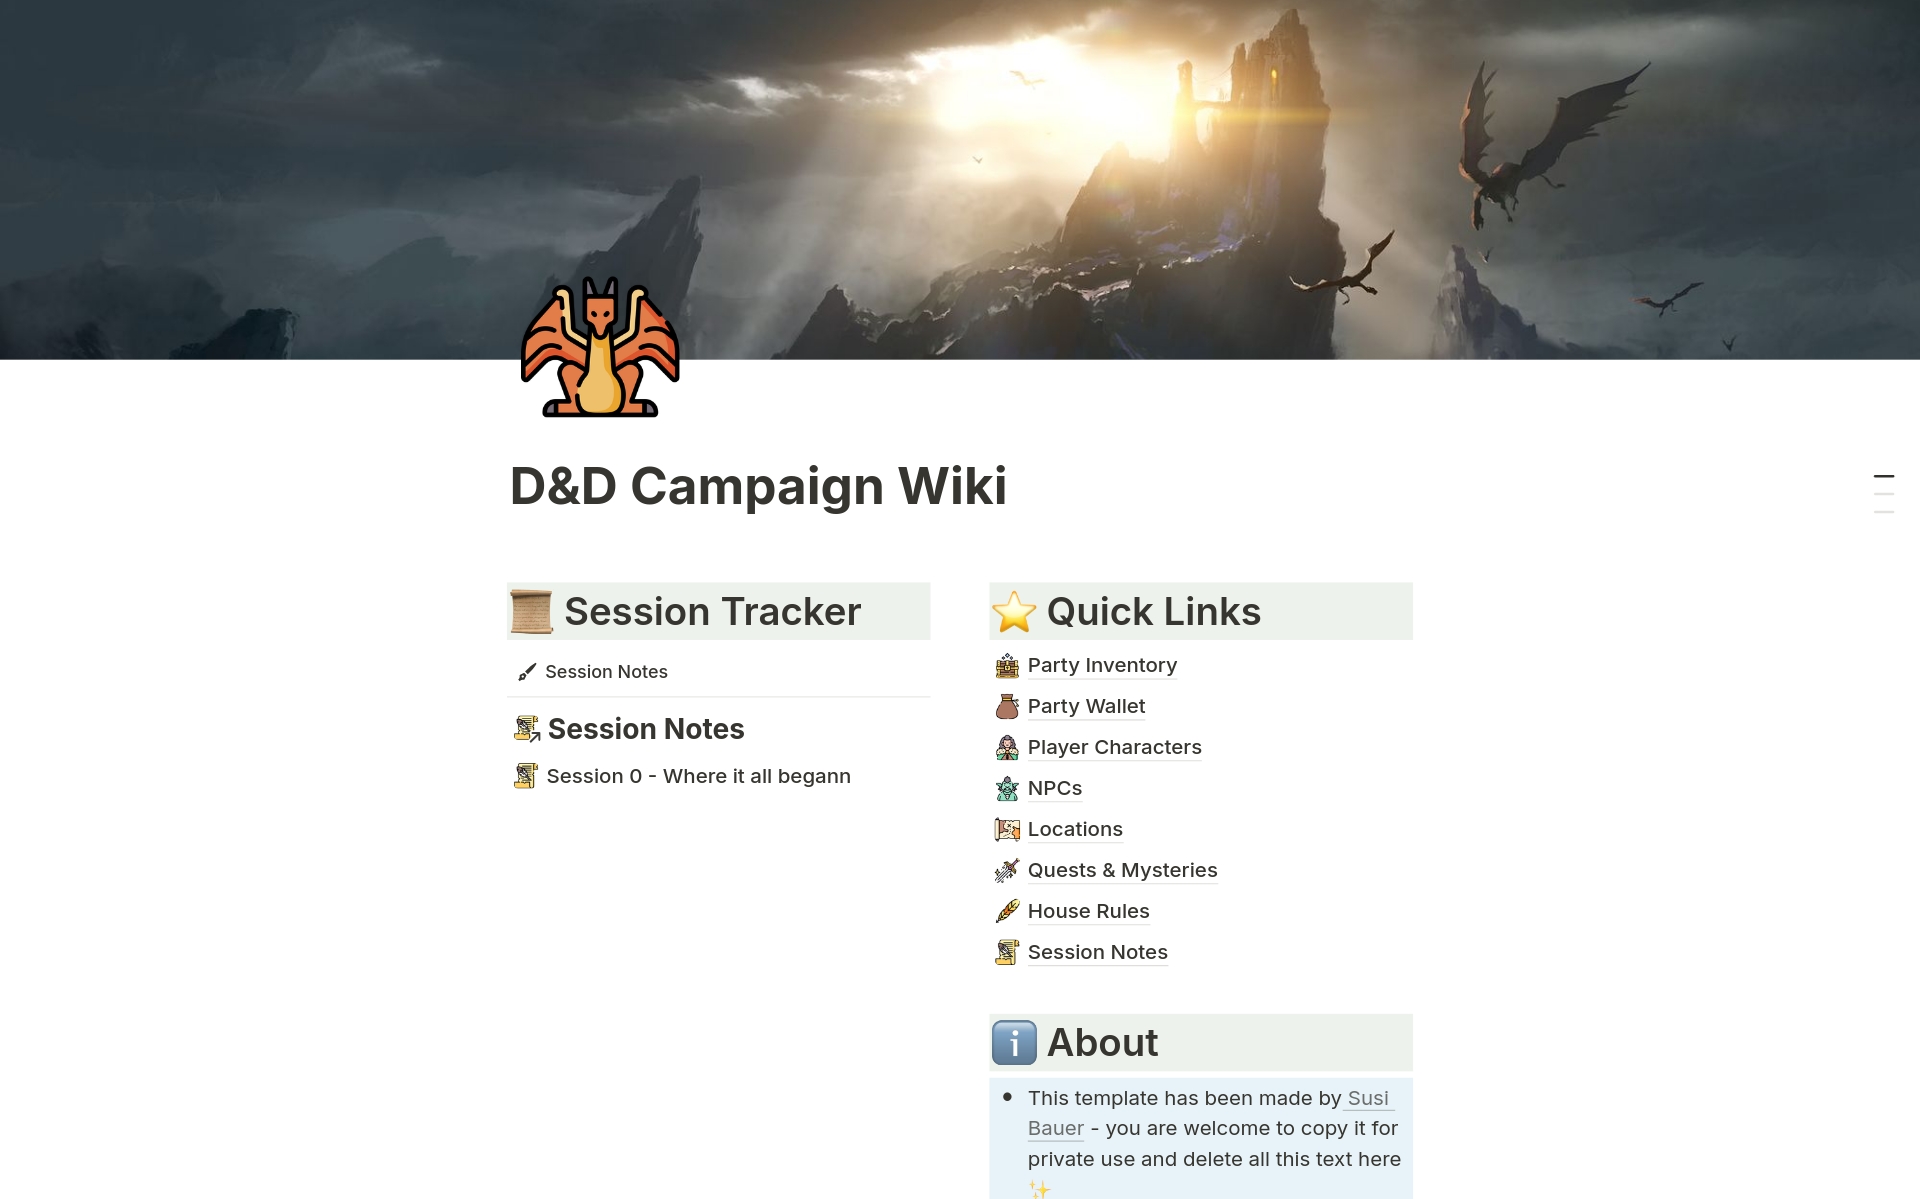 For Players, Dungeon Masters, D&D fans and other roleplayers.
Copy this template to...
📅 Track Sessions
🧝‍♂️ List NPCs & organisations
📜 See ongoing quests, mysteries and shenanigans
🗺️ Log locations, from continents to taverns
💰 Track your loot & valuables
... and more!